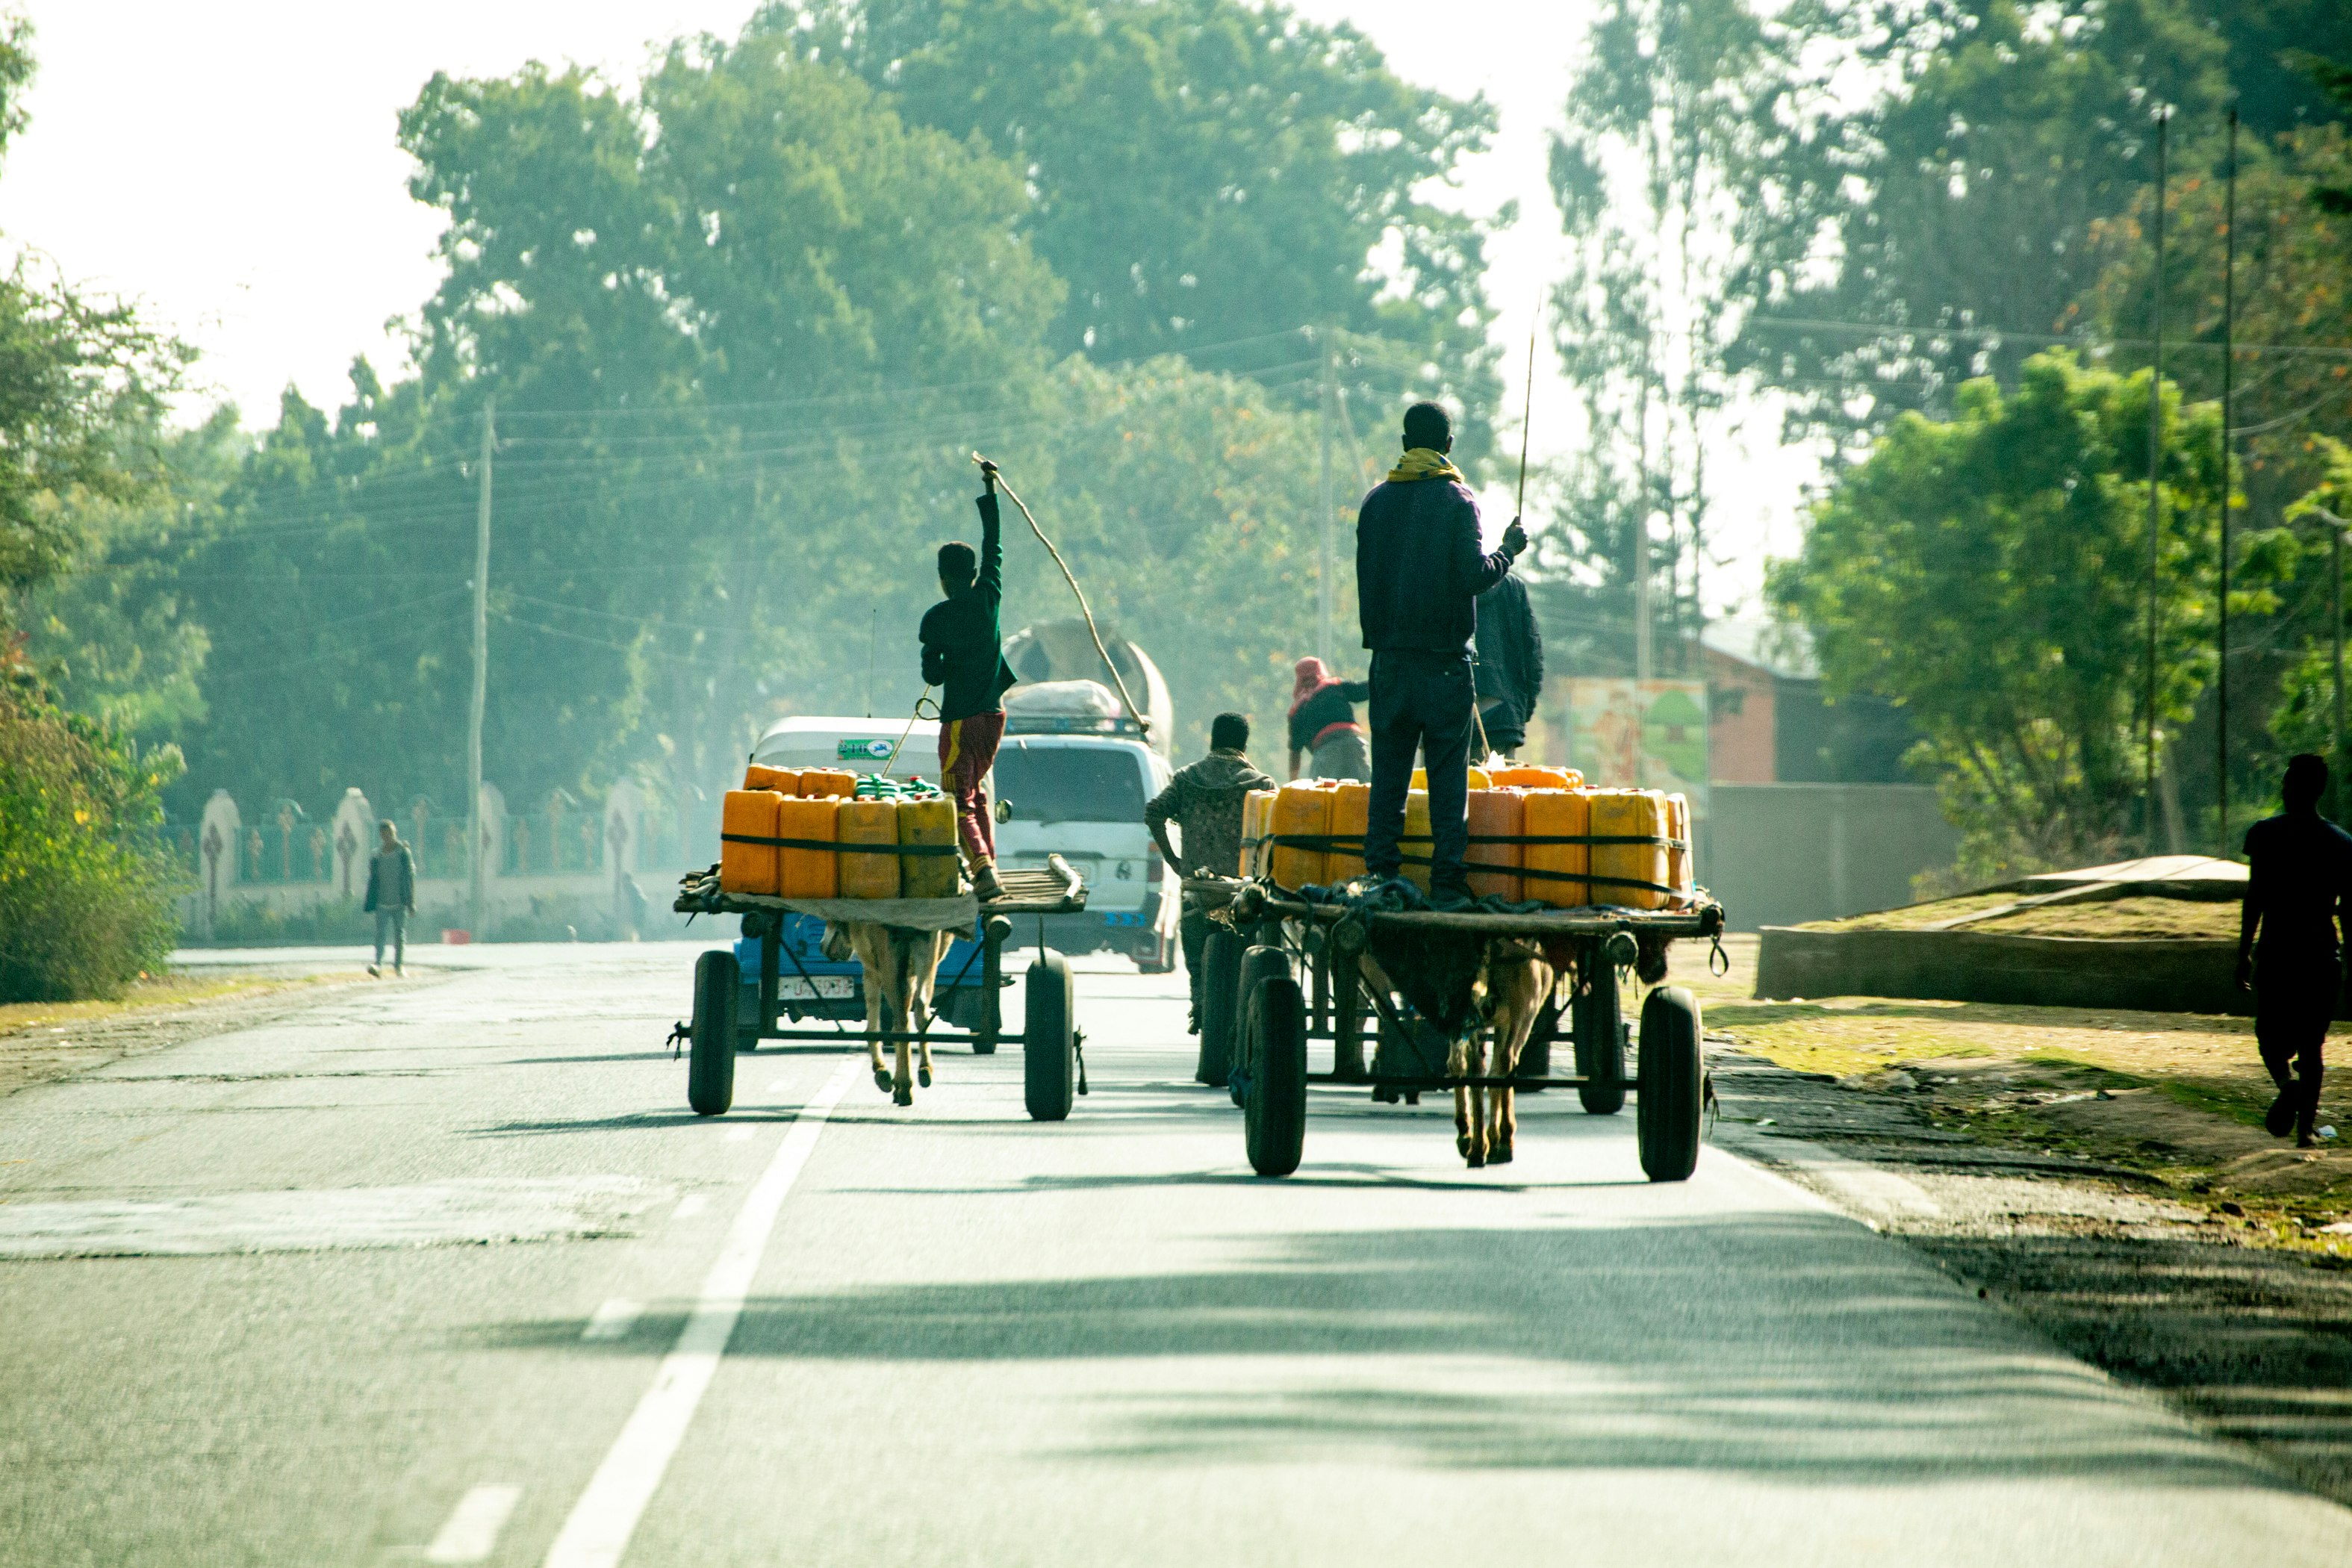 2 men riding on brown wooden cart on road during daytime